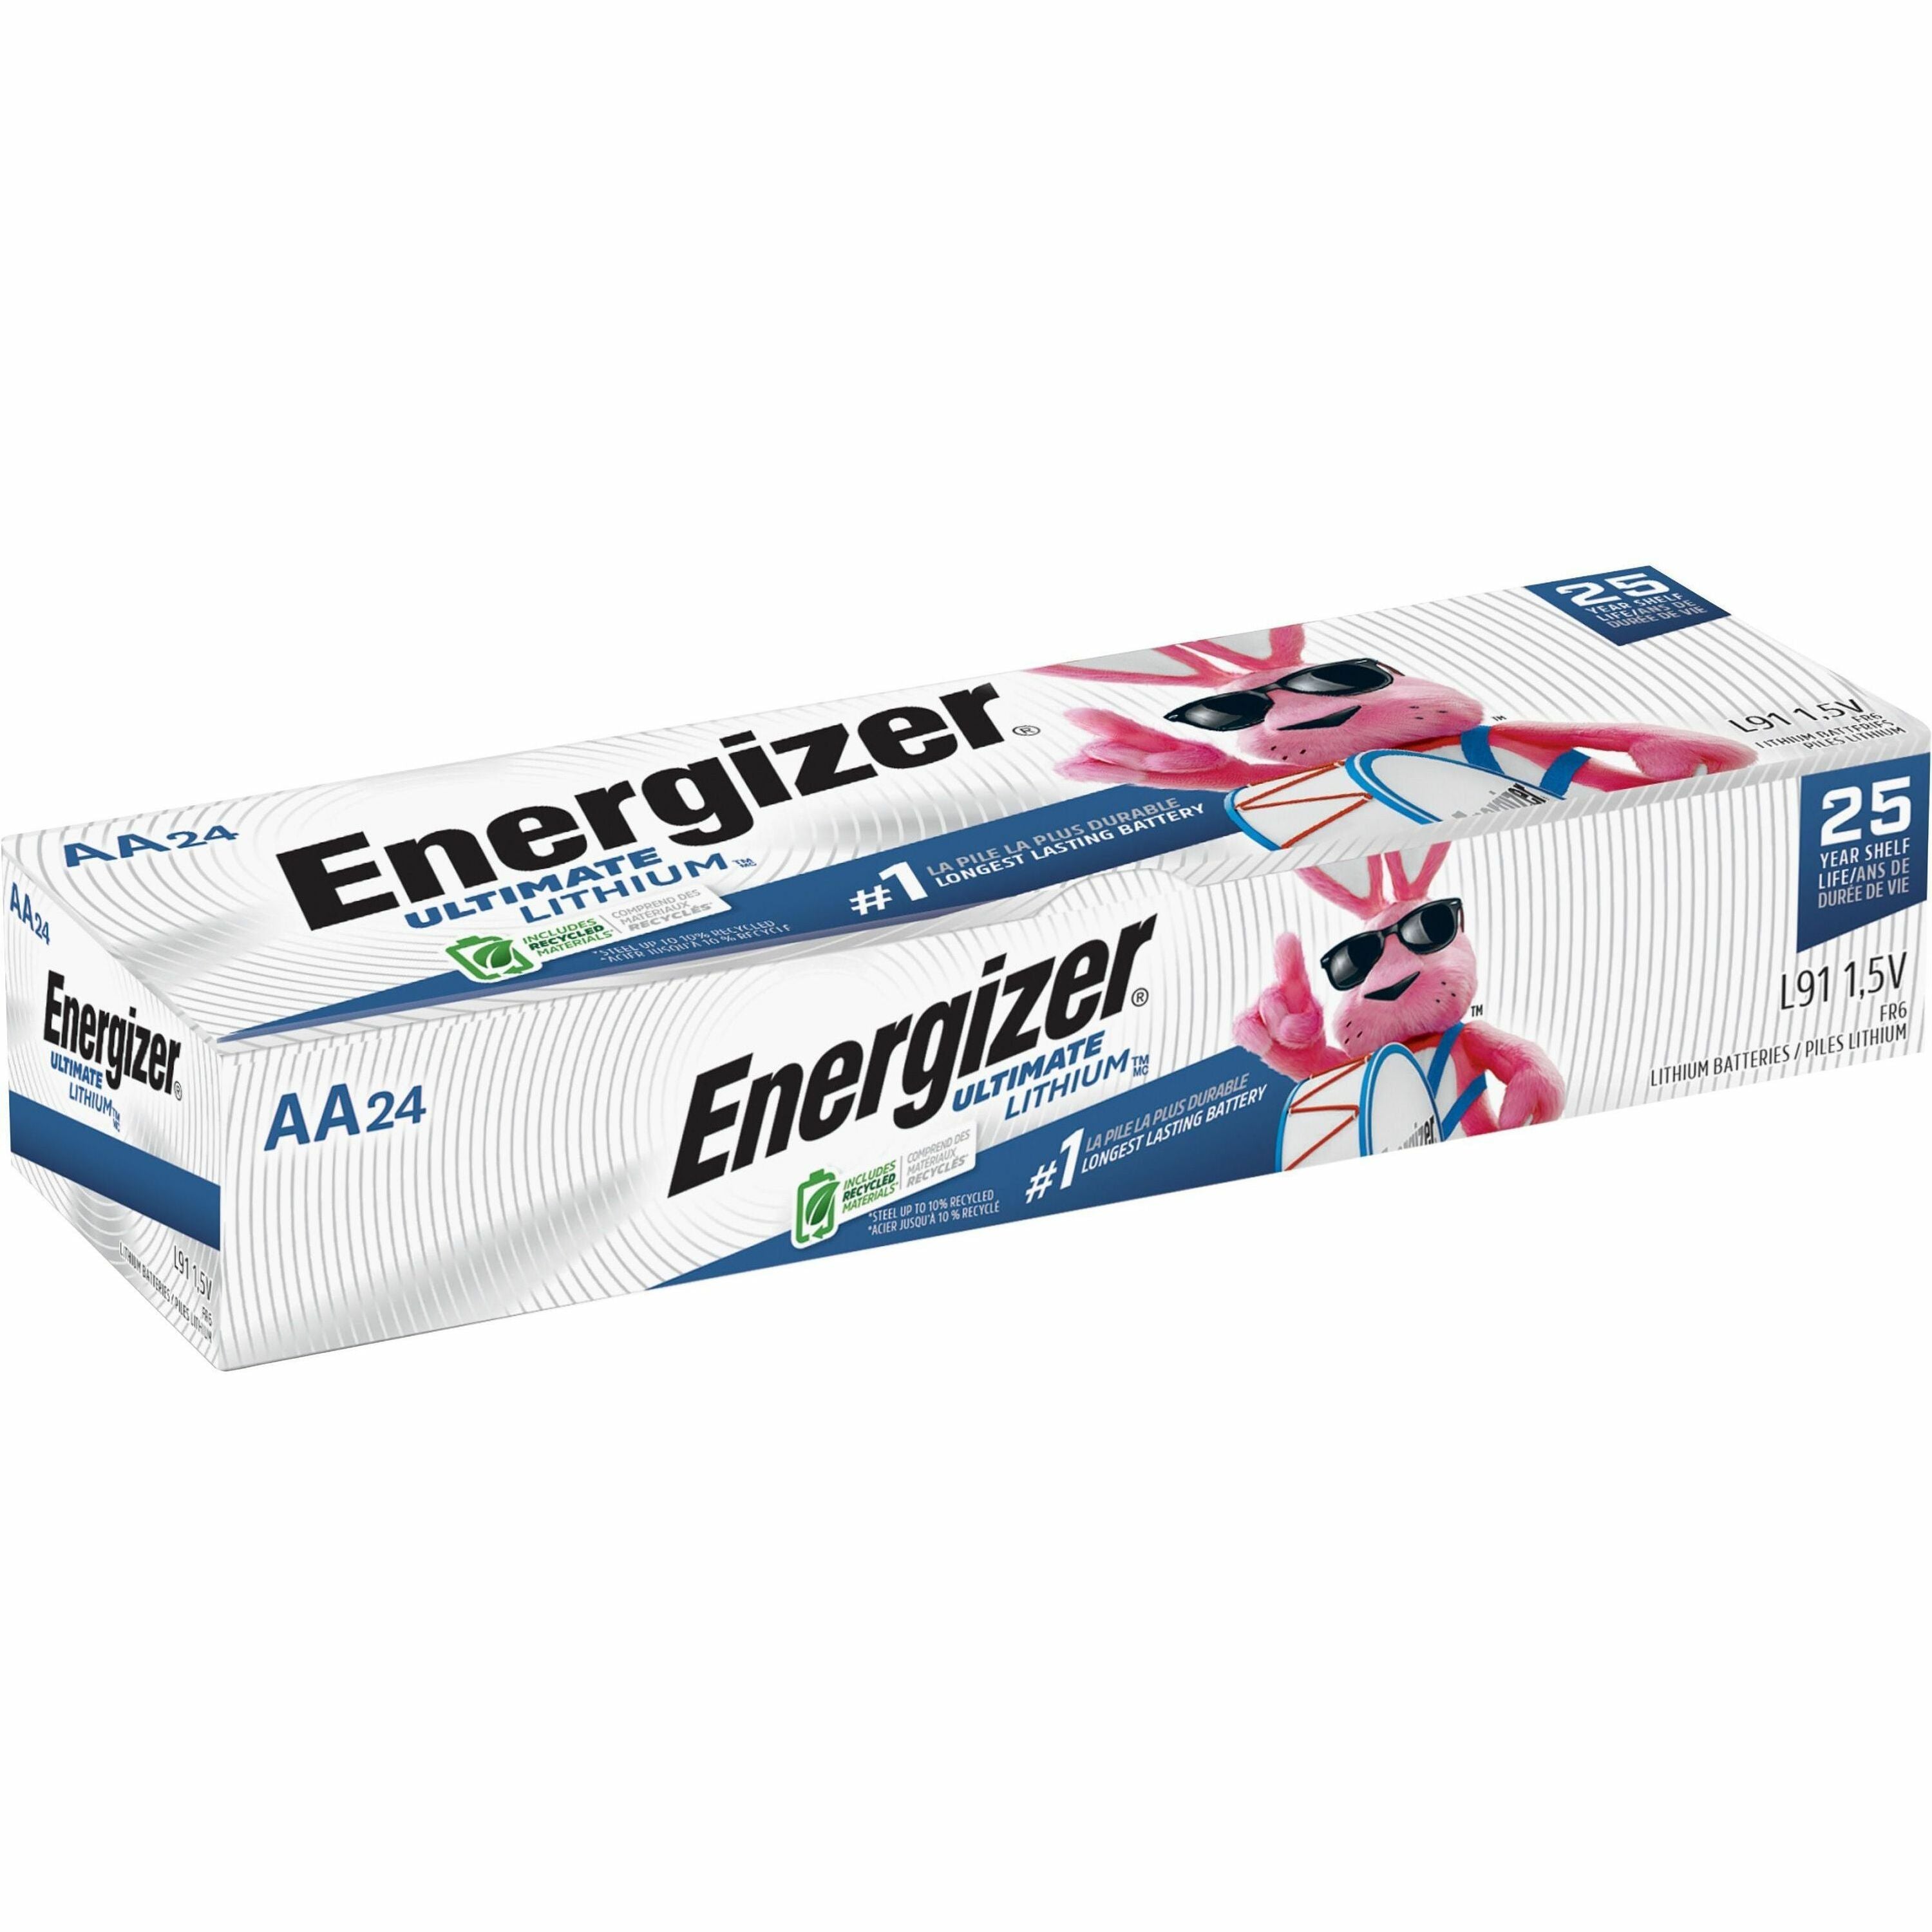 energizer-ultimate-lithium-aa-batteries-4-packs-for-led-light-stud-finder-mouse-laser-level-aa-3000-mah-36-carton_evel91ct - 1